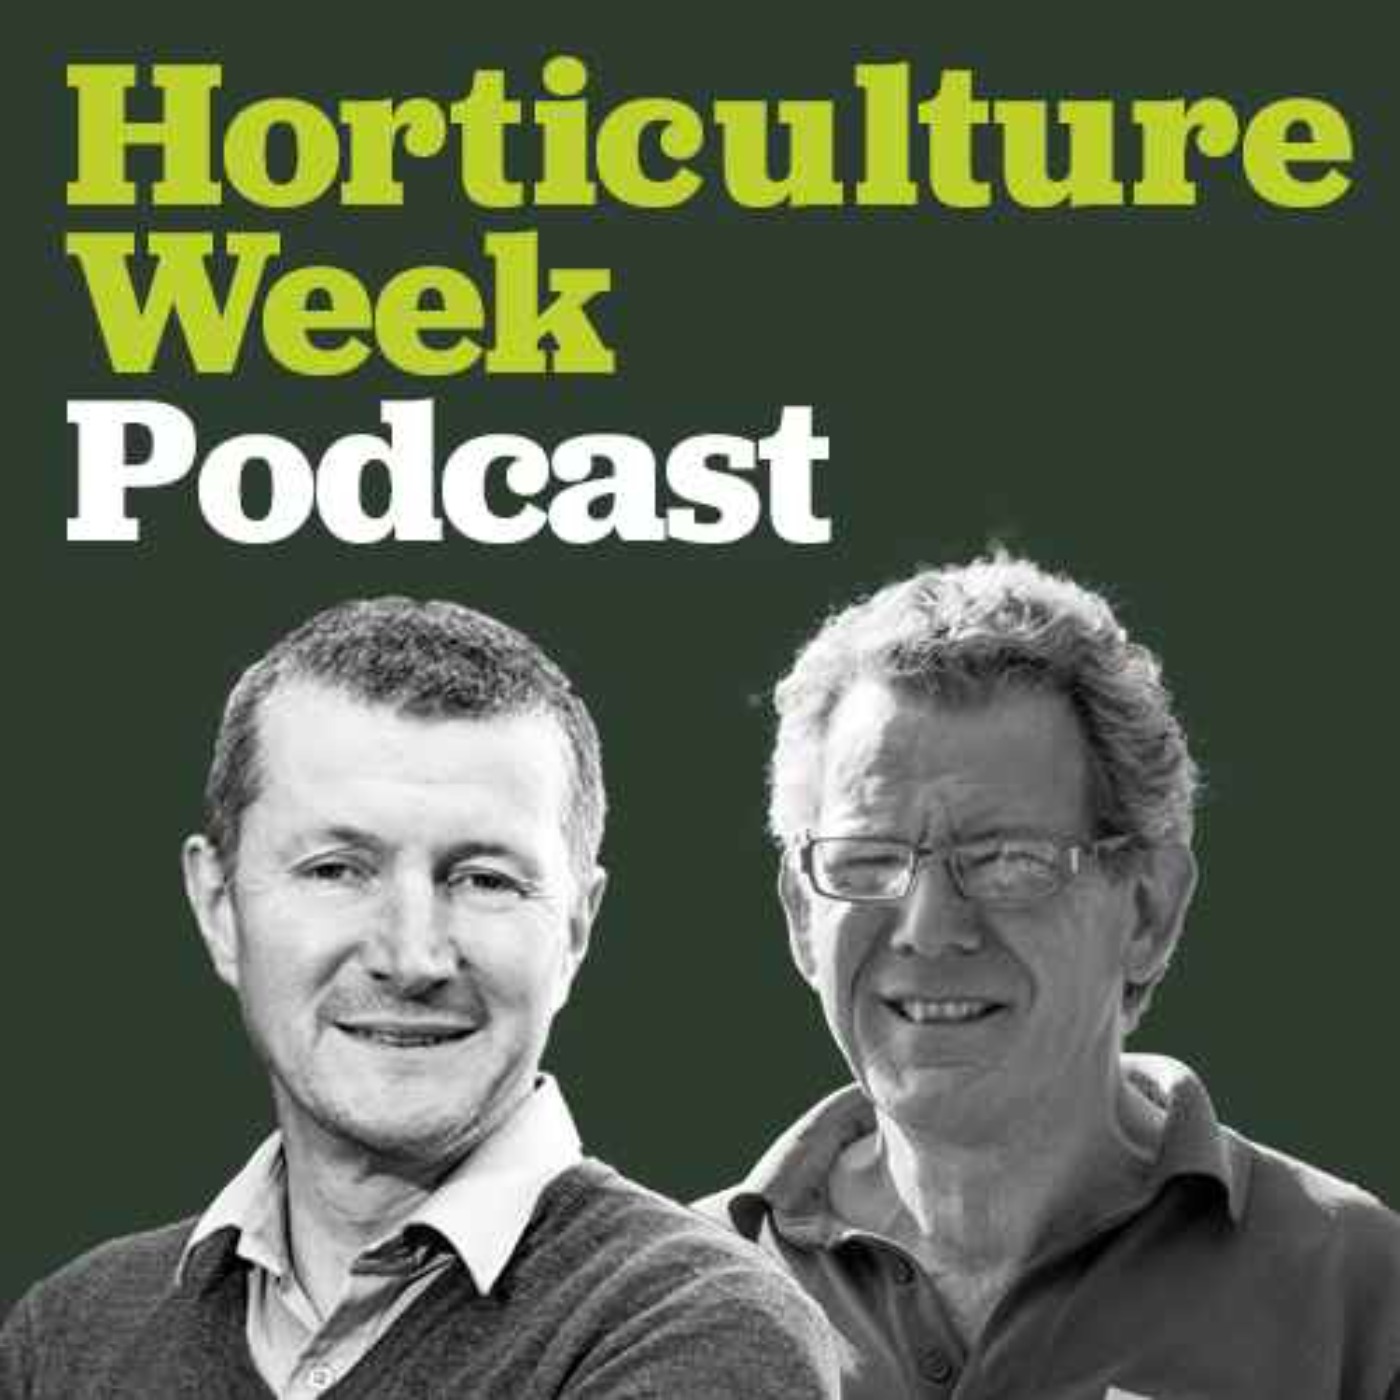 Nick Hamilton talks peat-free, his father Geoff's legacy and the future of Barnsdale